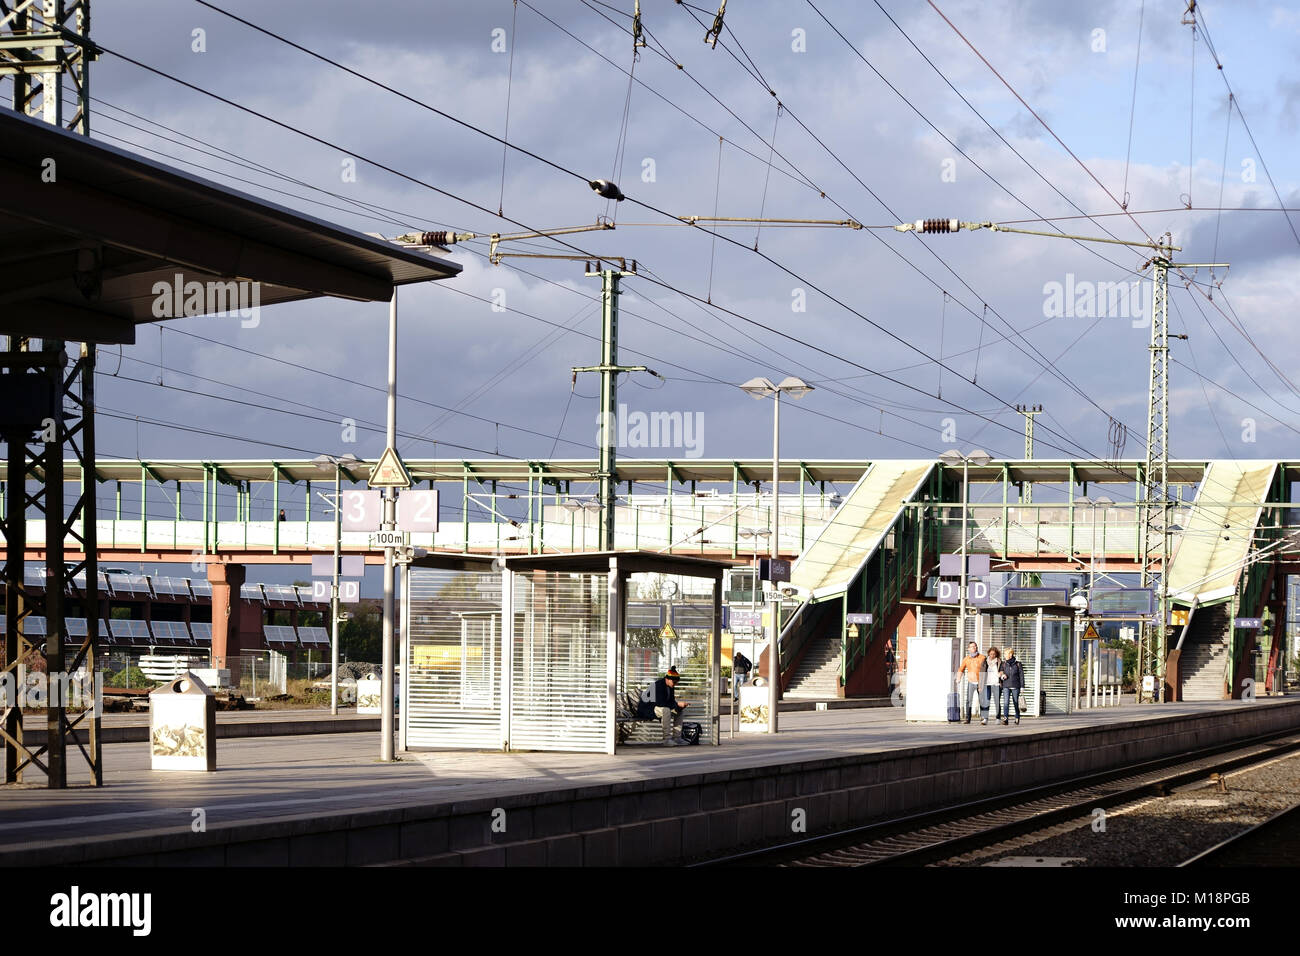 Giessen, Germany - October 03, 2017: Platforms with travelers and bridge buildings of the Giessen central station on October 03, 2017 in Giessen. Stock Photo